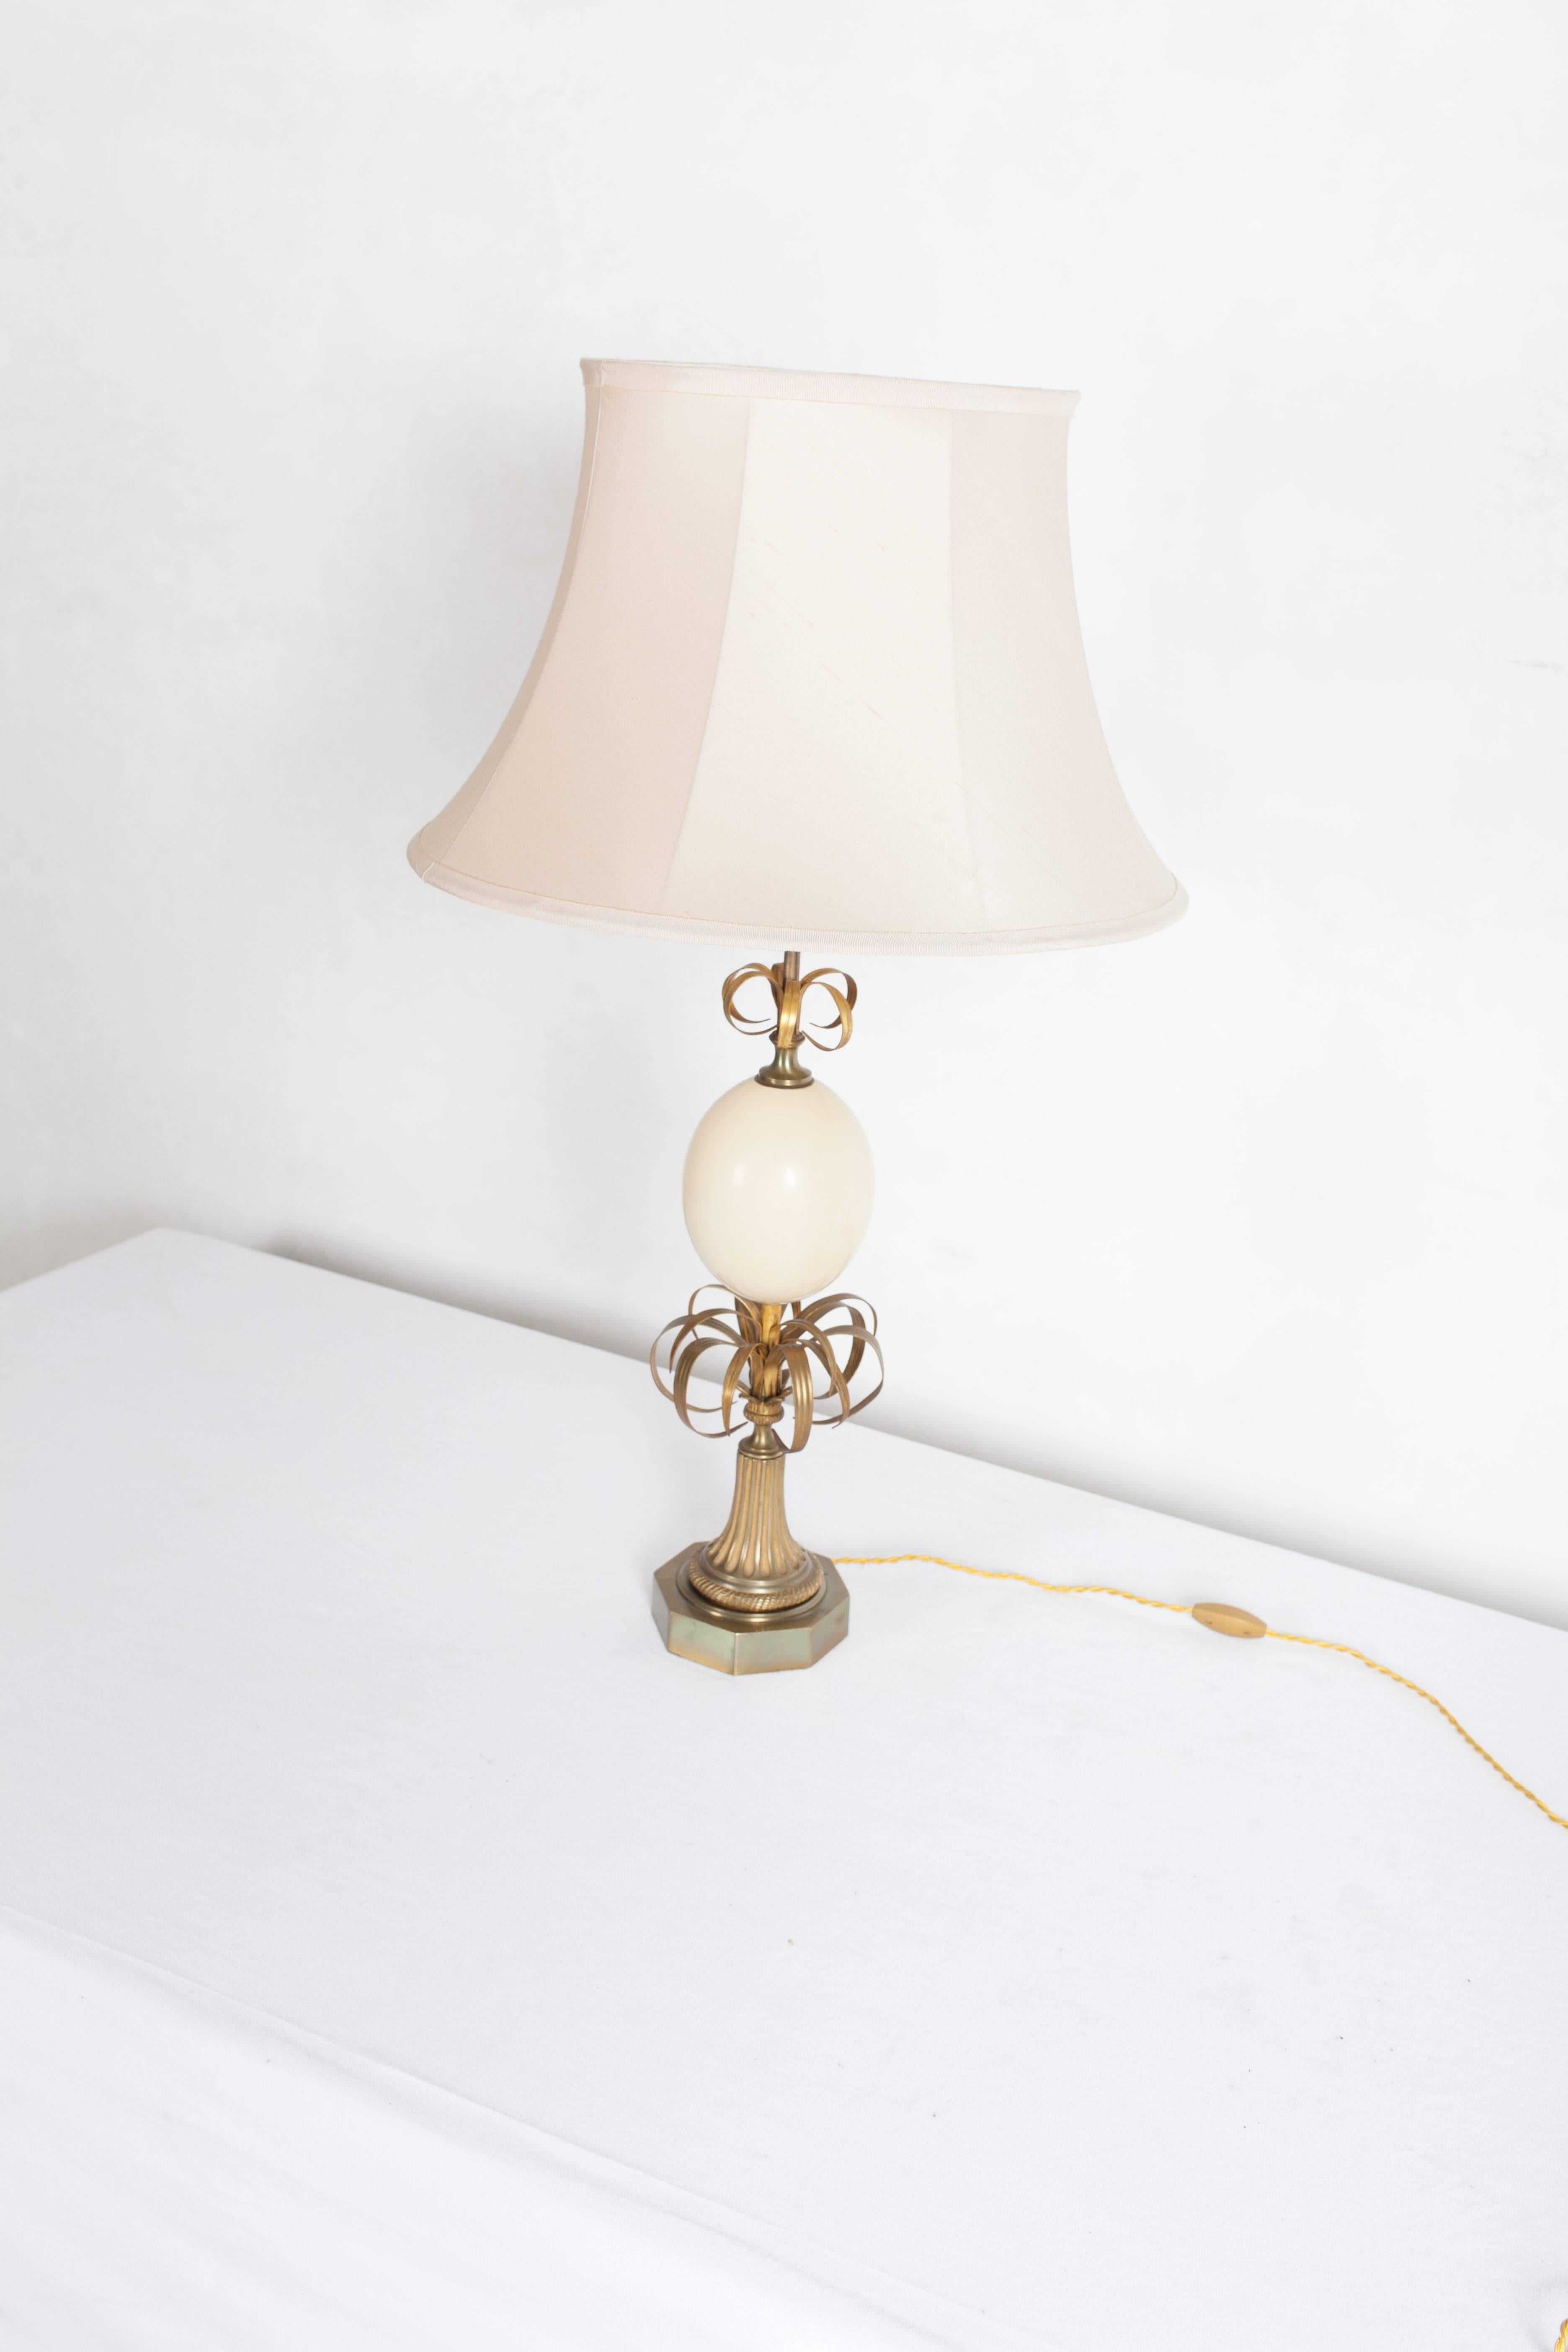 Hollywood Regency Sculptural Table Lamp by Maison Jansen, 1960s In Excellent Condition For Sale In Antwerp, BE